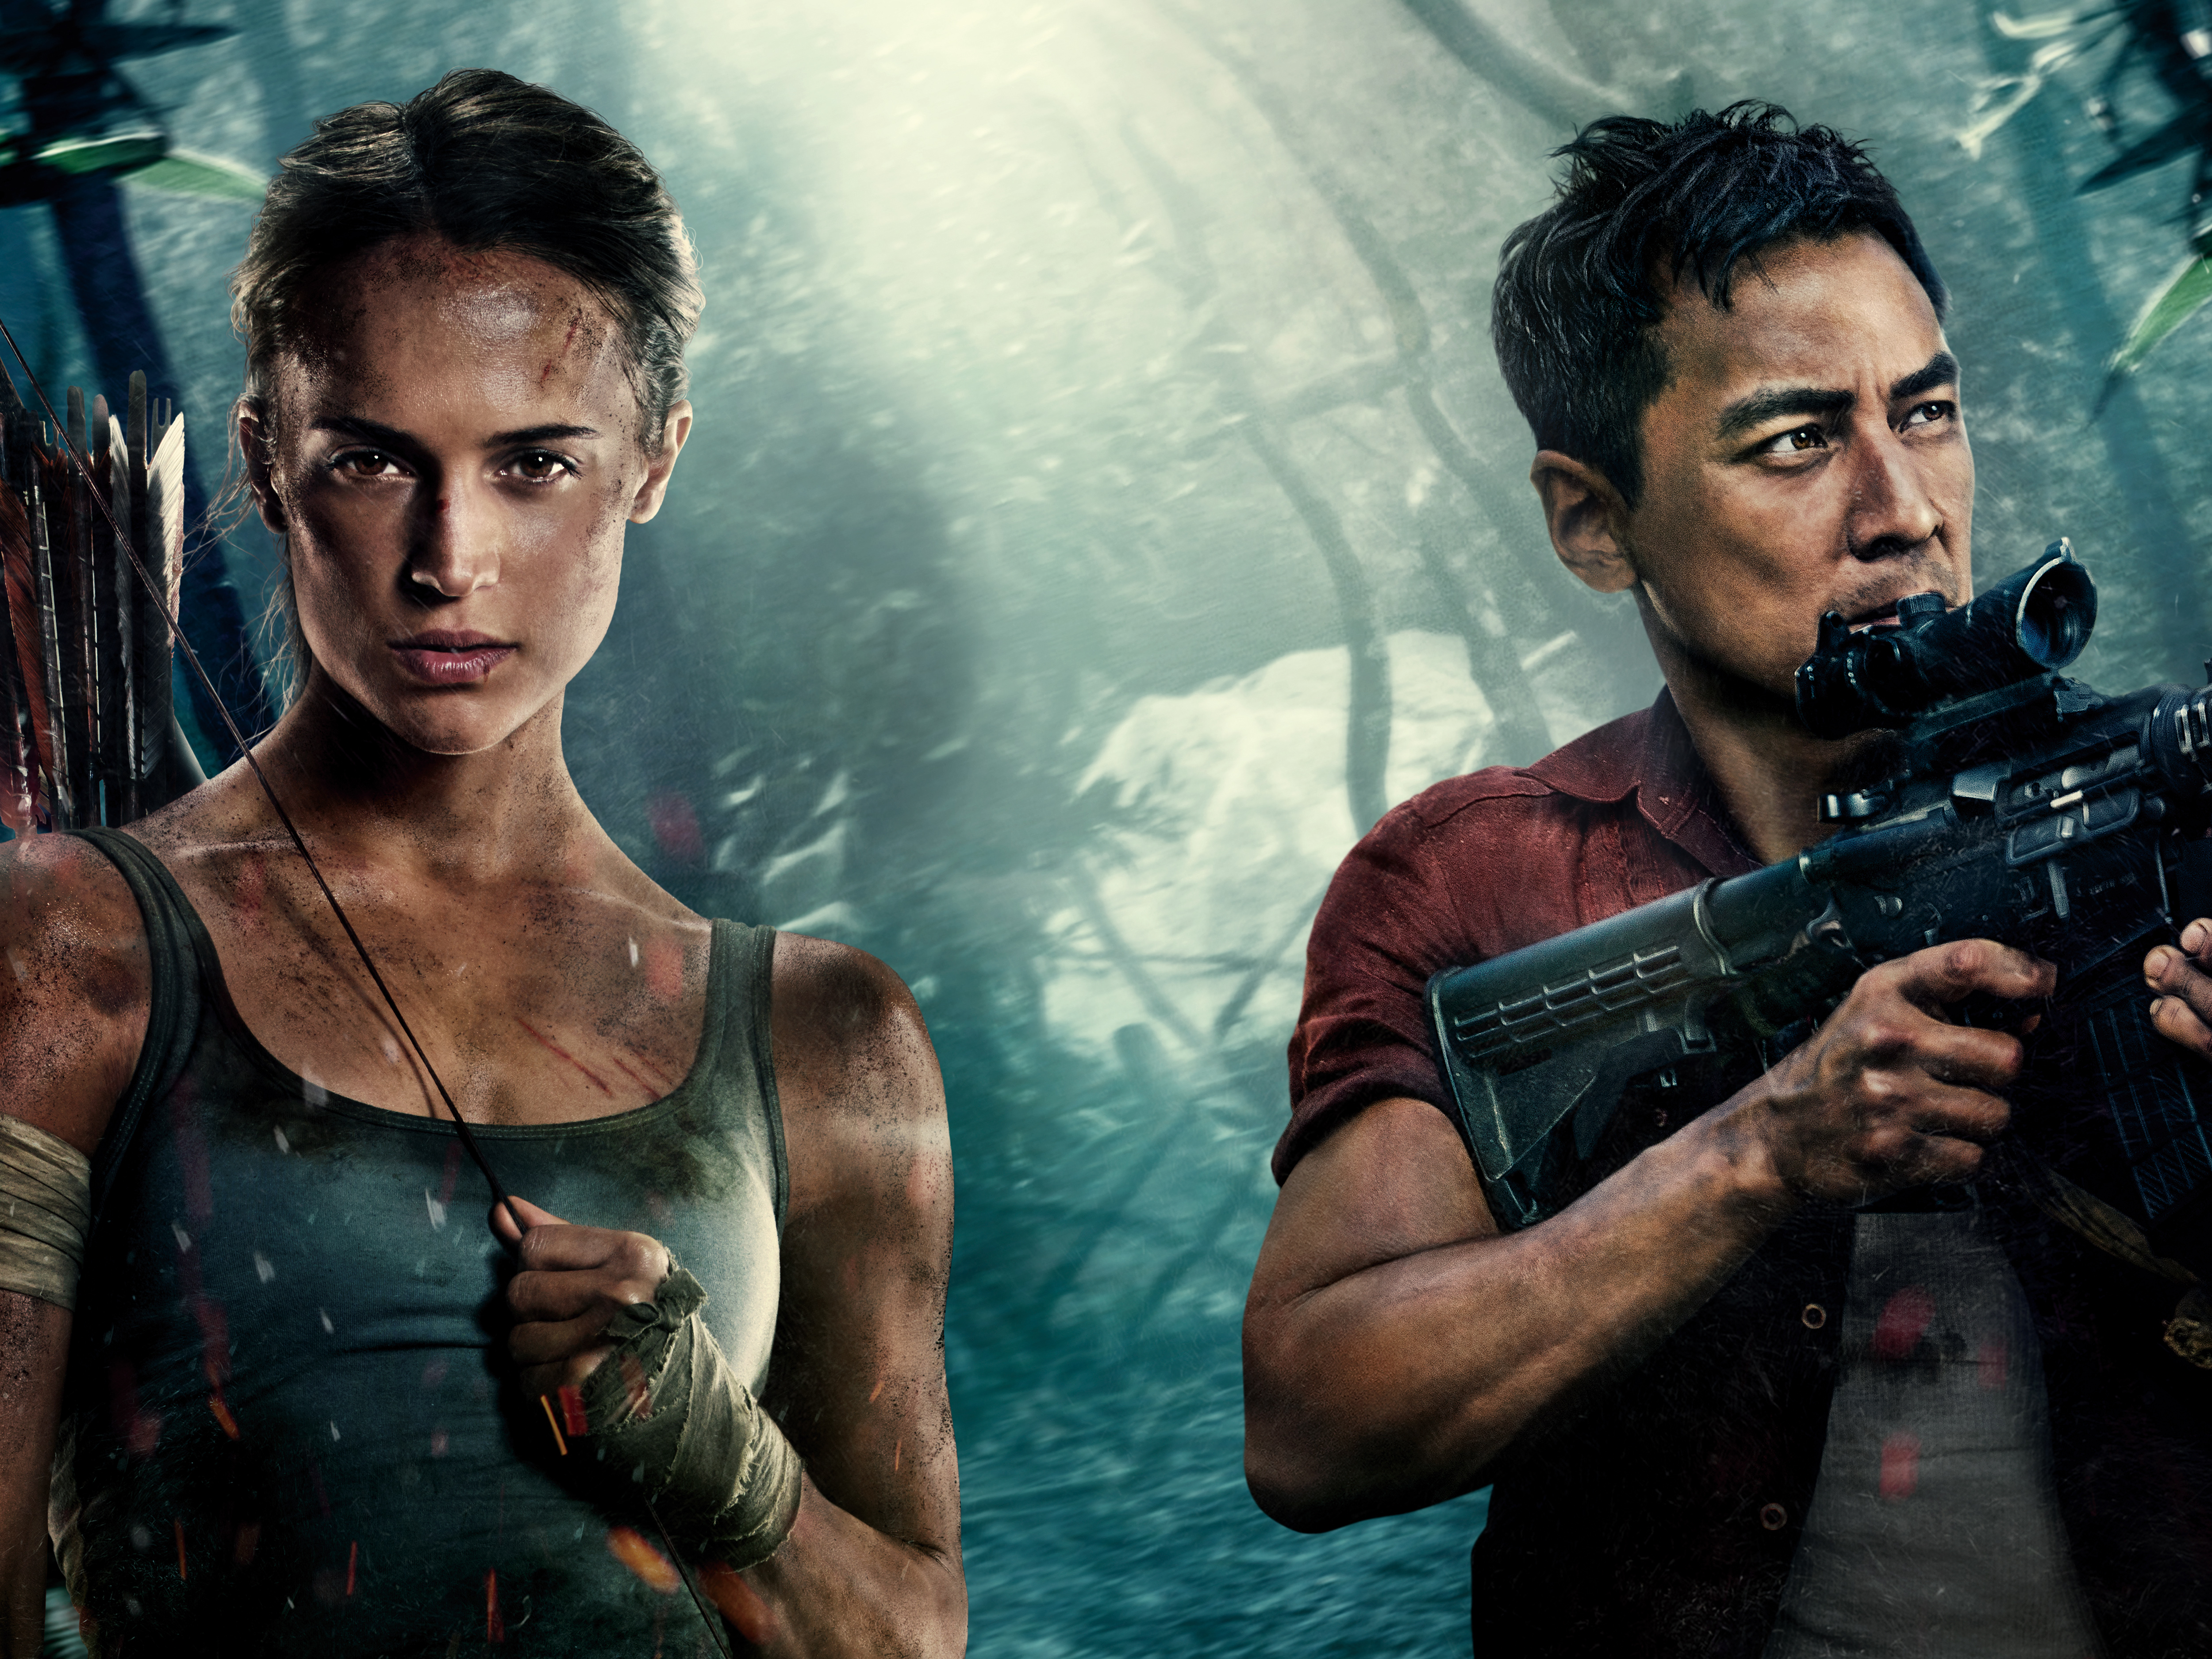 12 Minutes Of Footage From The Tomb Raider Film Reveals 